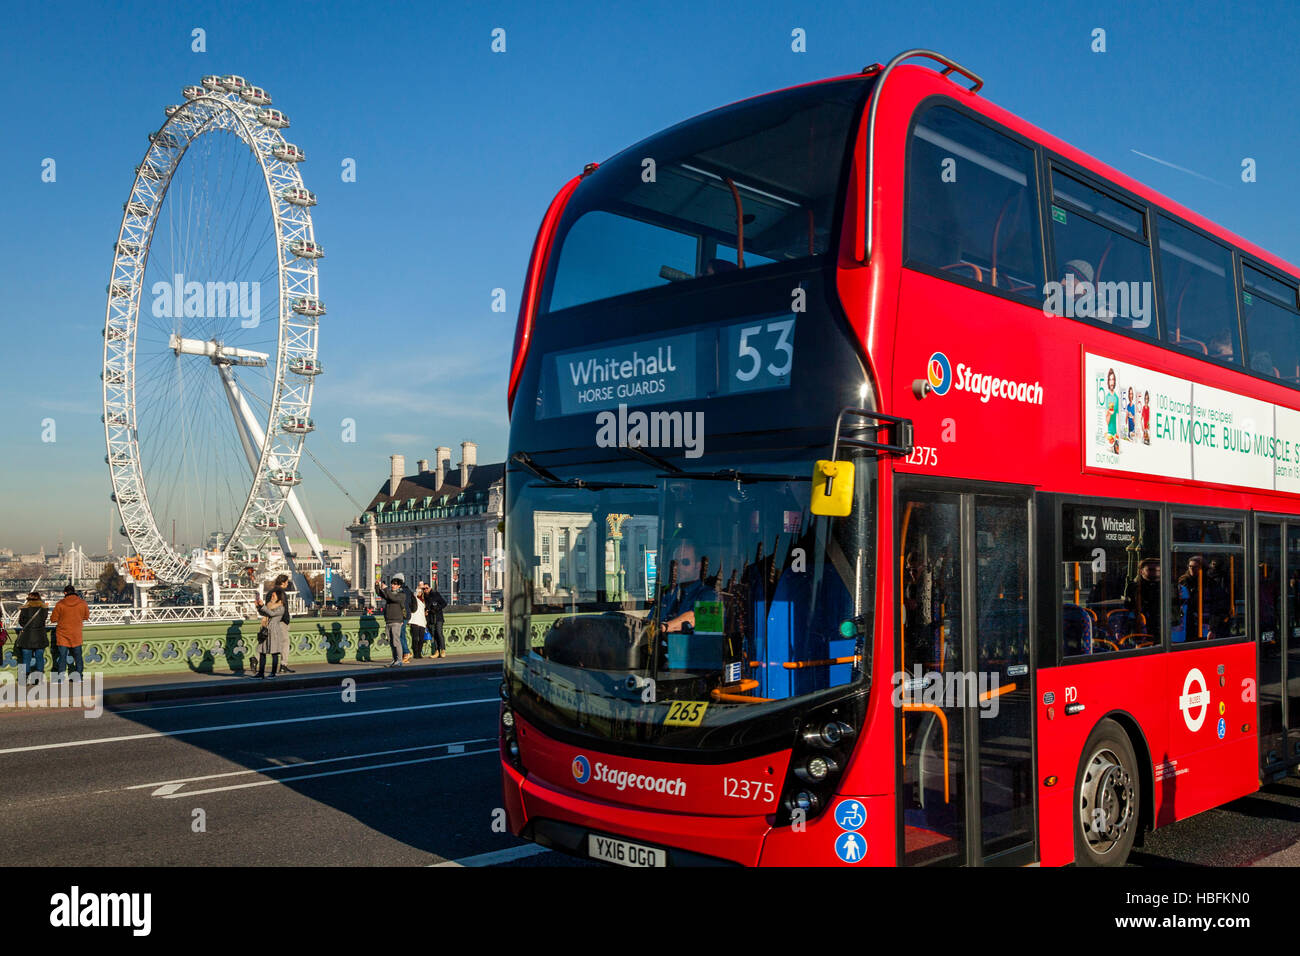 A London Bus Crossing Westminster Bridge With The London Eye In The Backround, London, England Stock Photo